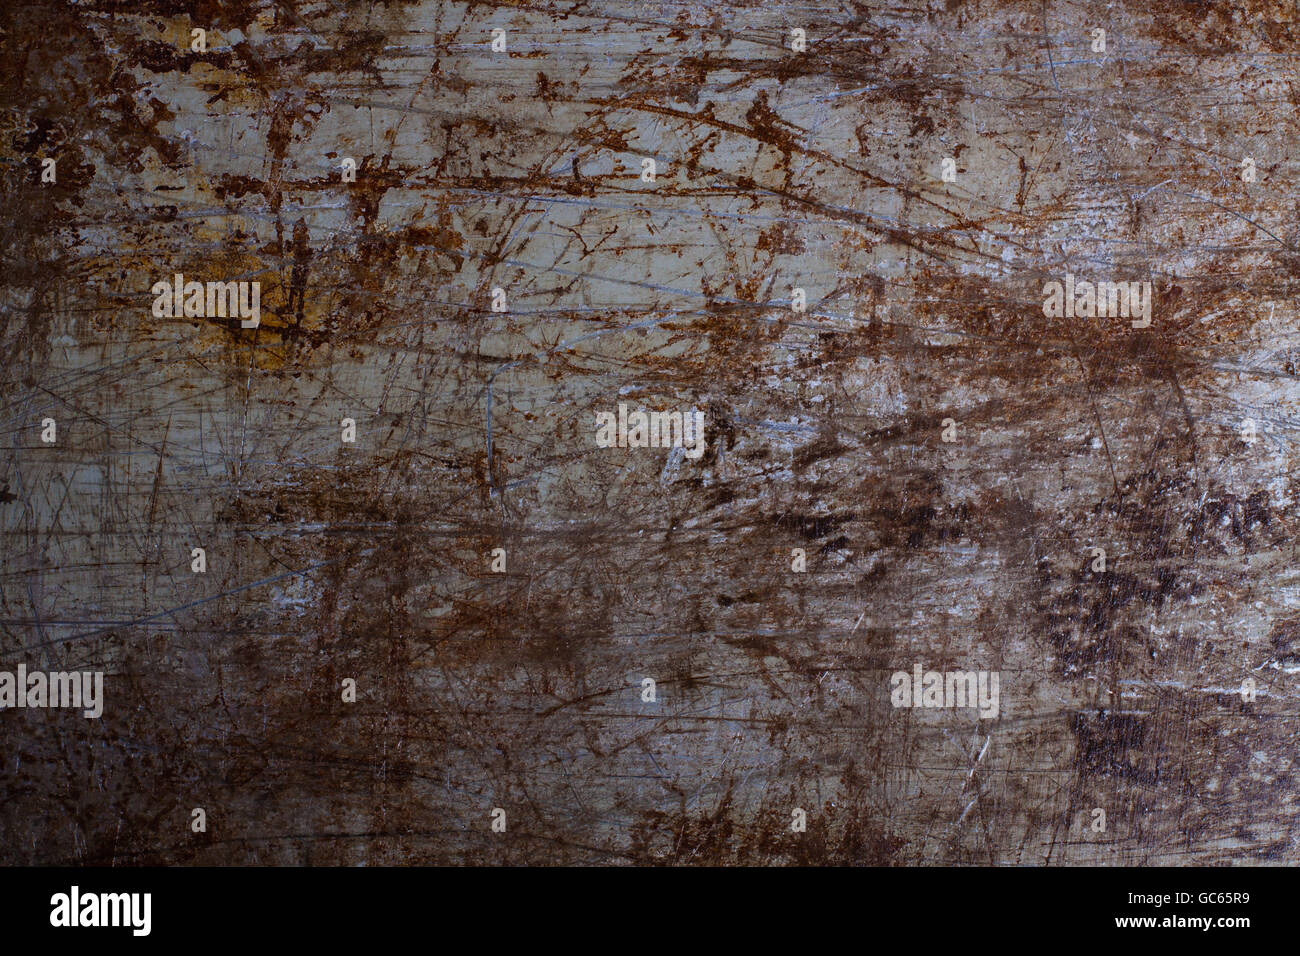 Wallpaper of scratch and rusty metal, painted on gray. Stock Photo